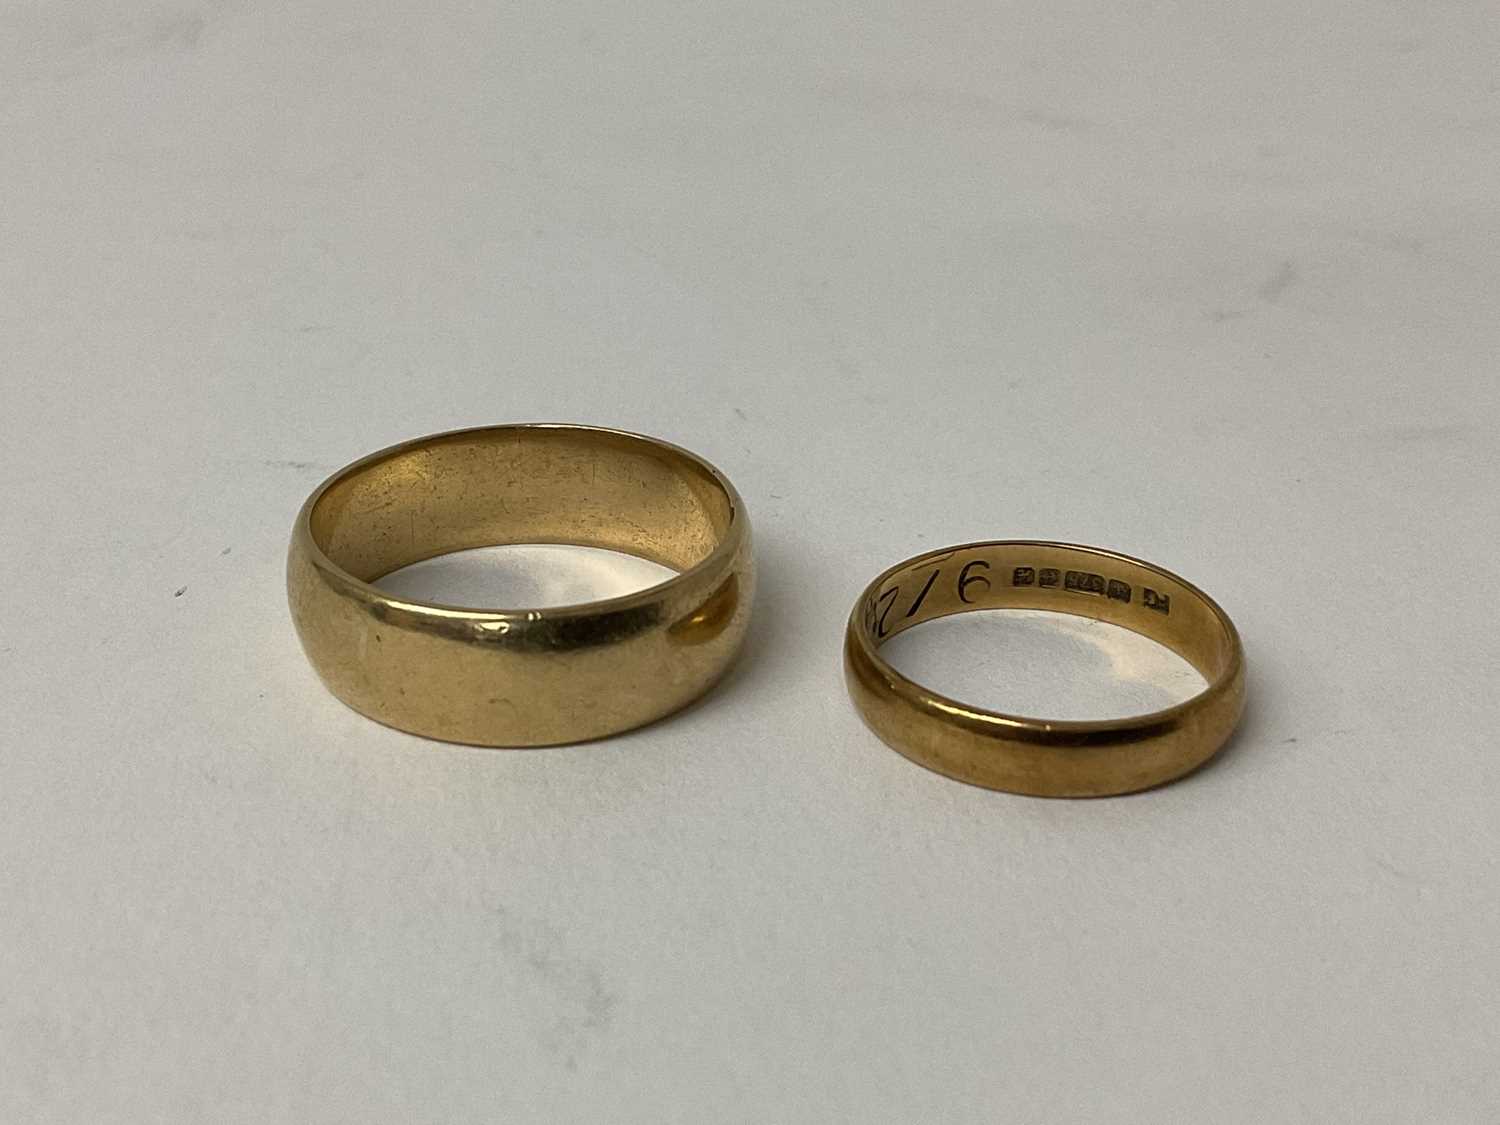 9ct gold wedding band, size T 1/2 and another 9ct wedding band, size M (2) 8.1 grams